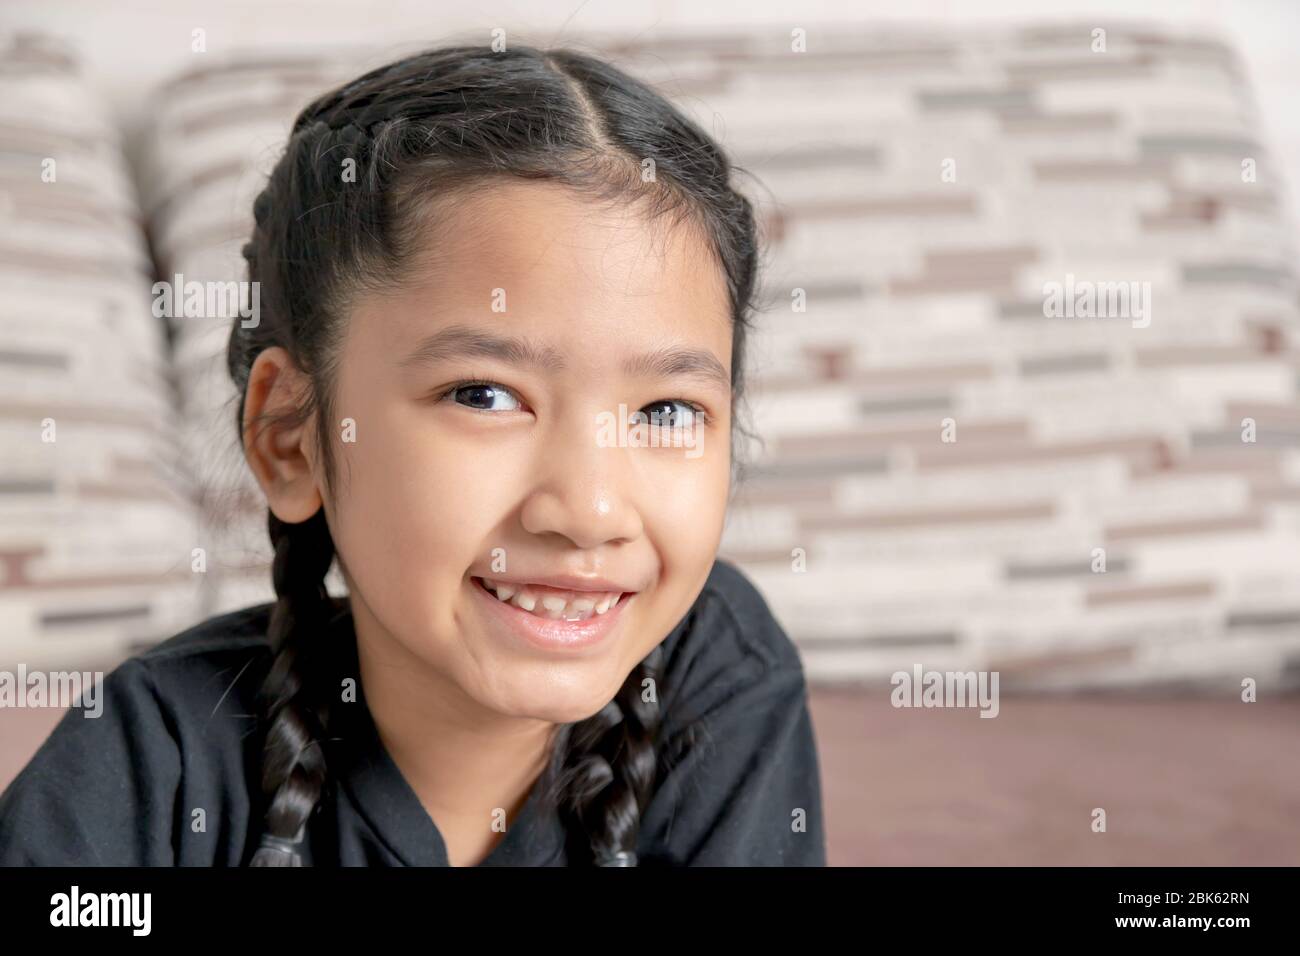 A little Asian girl in a black braid is smiling at the sofa Stock Photo